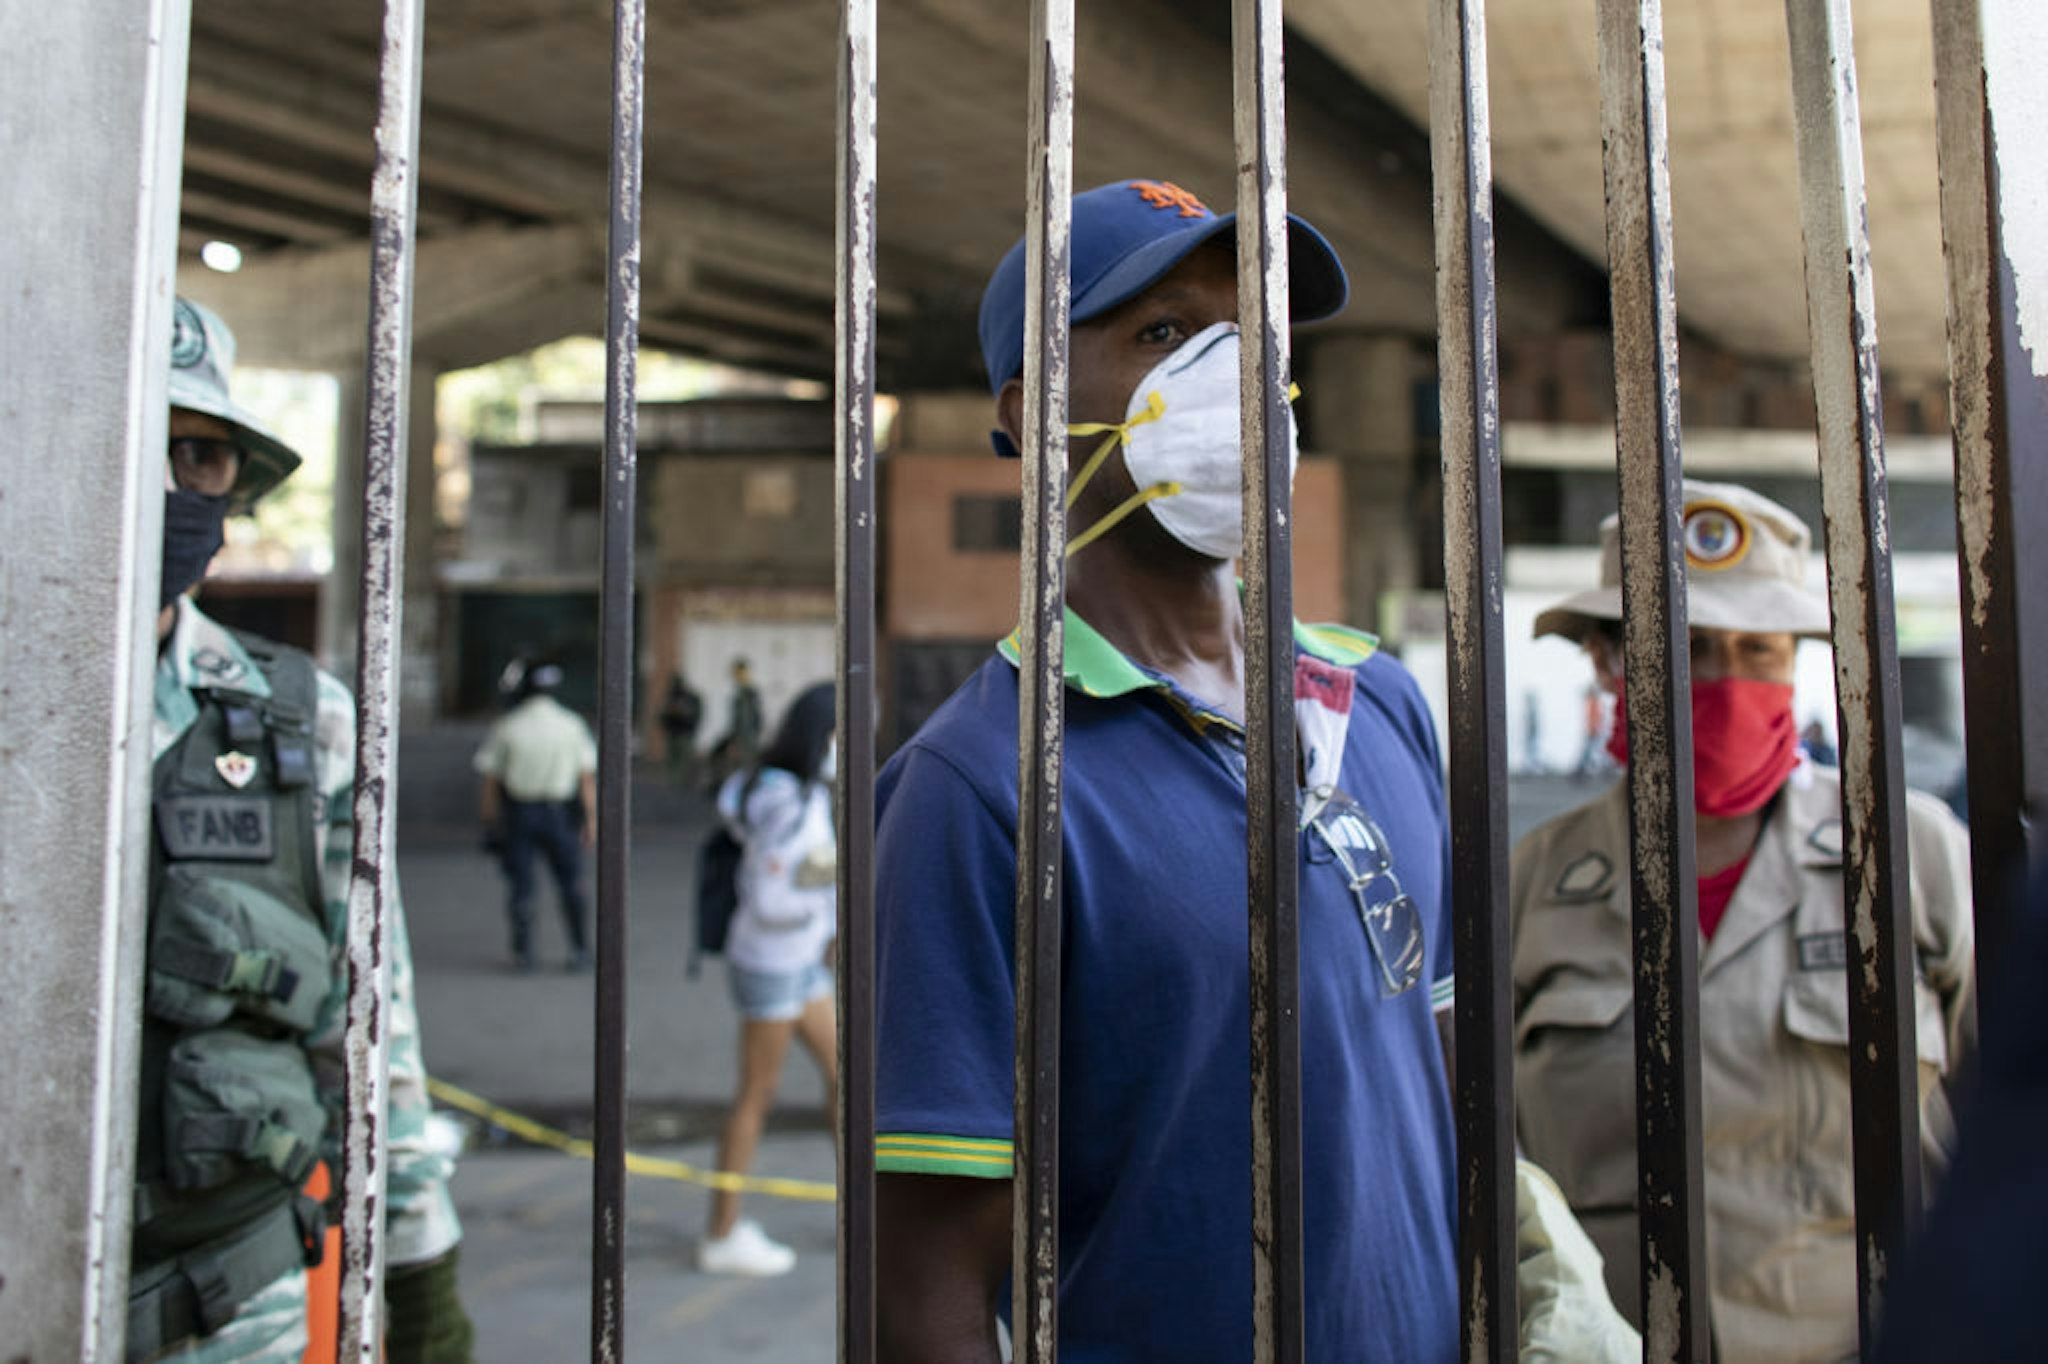 A person wearing a protective mask waits behind a security gate outside of the Ana Francisca Perez de Leon Hospital in the Petare neighborhood of Caracas, Venezuela, on Wednesday, April 15, 2020.